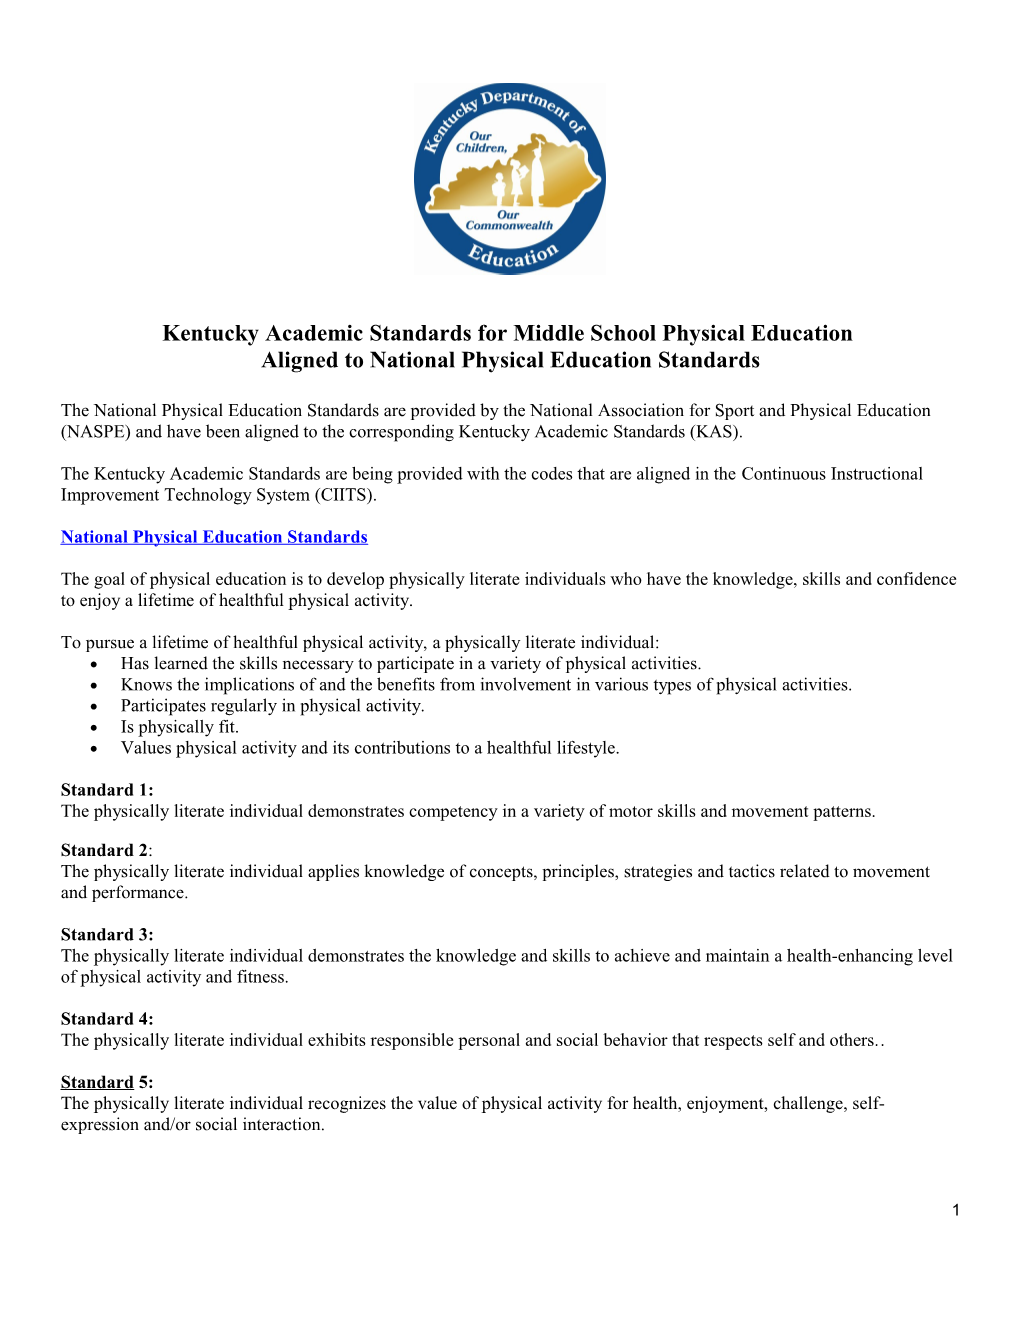 Kentucky Academic Standards for Middle School Physical Education